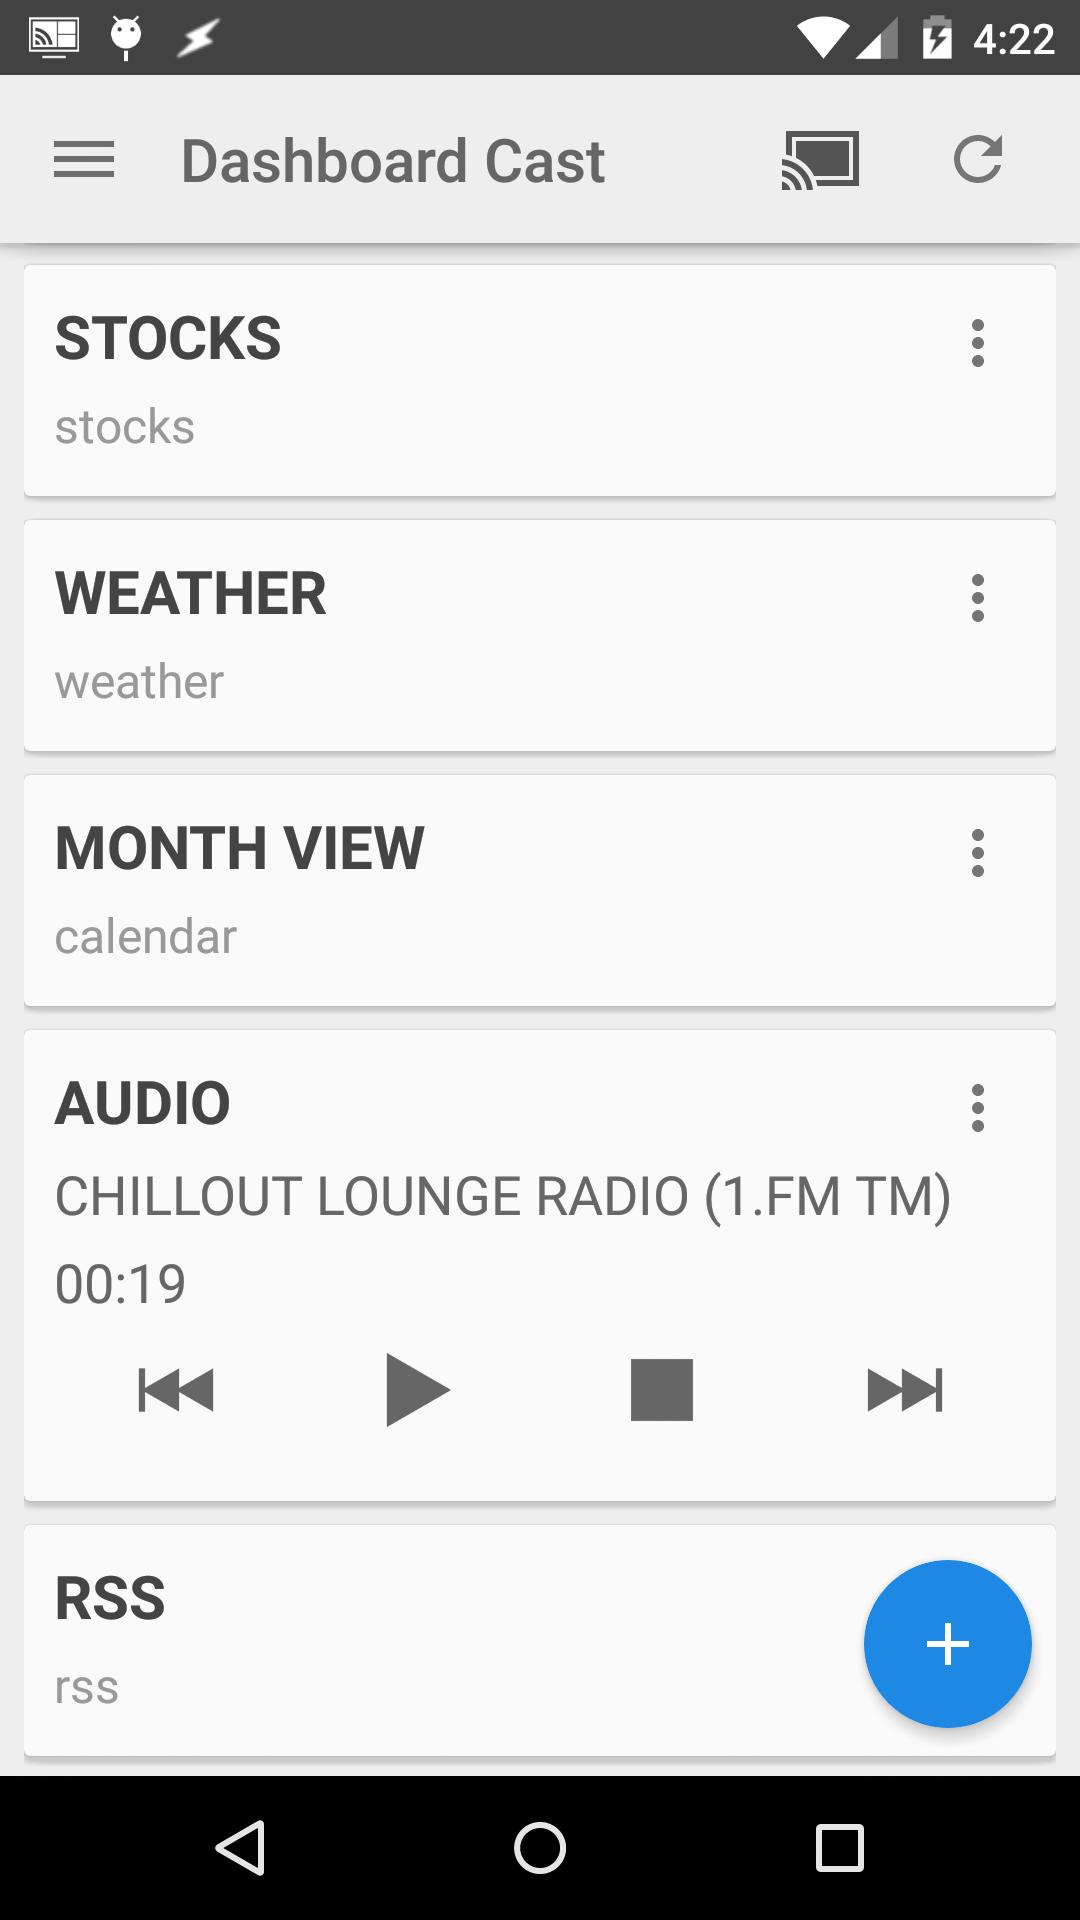 Dashboard Cast for Android - APK Download